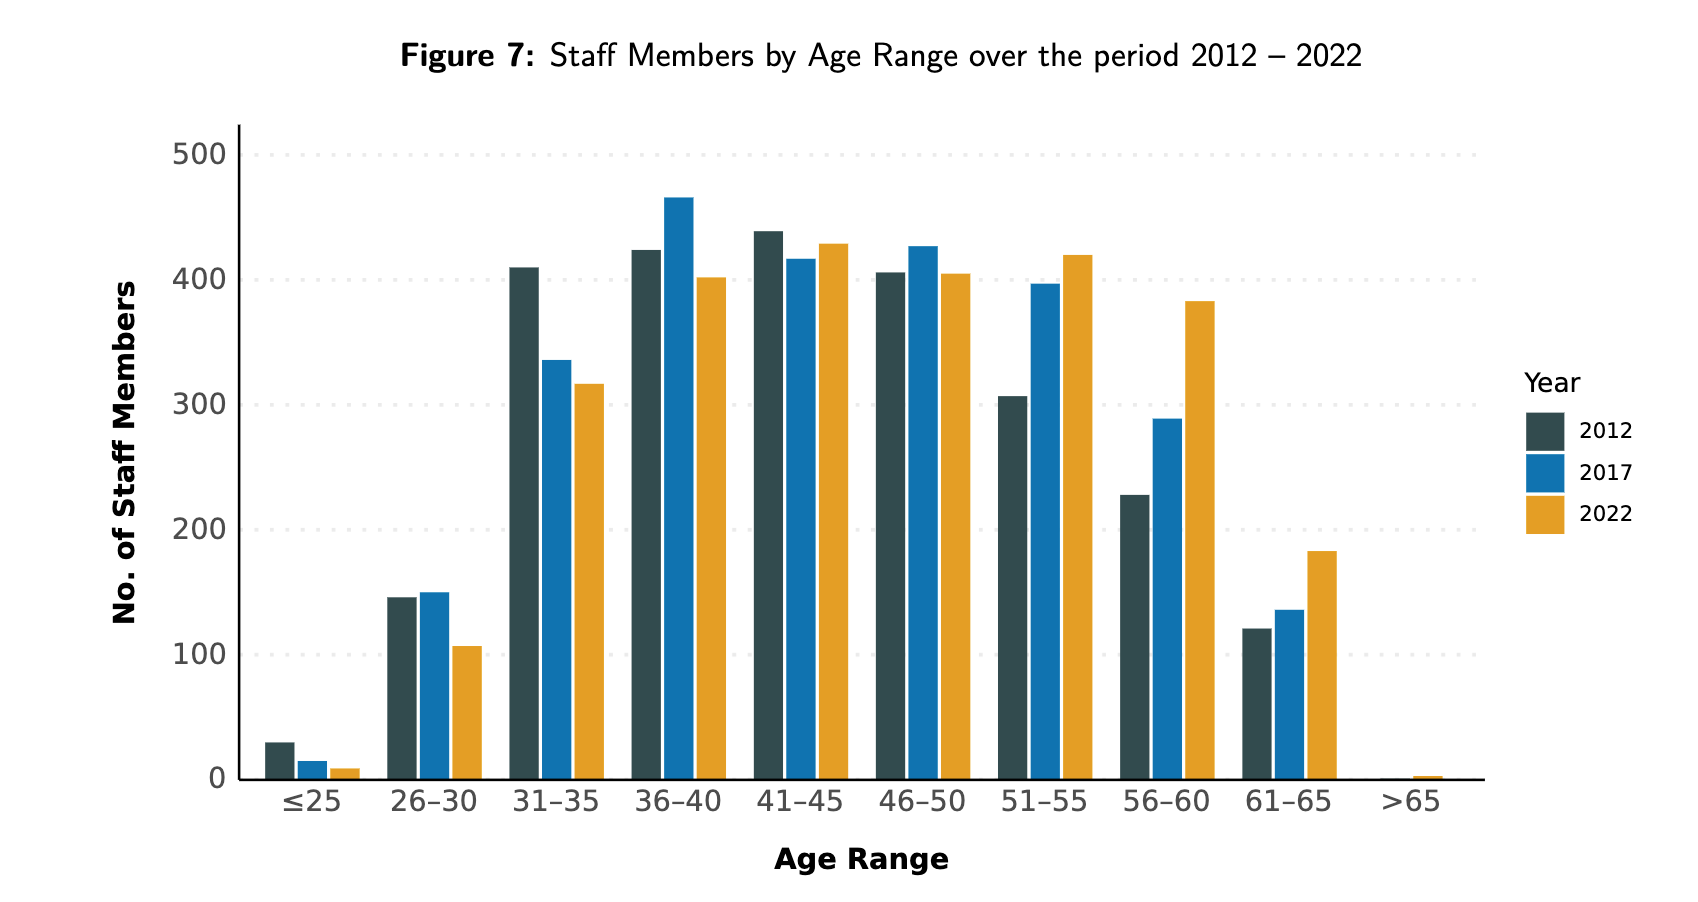 Staff members by age range to 2022